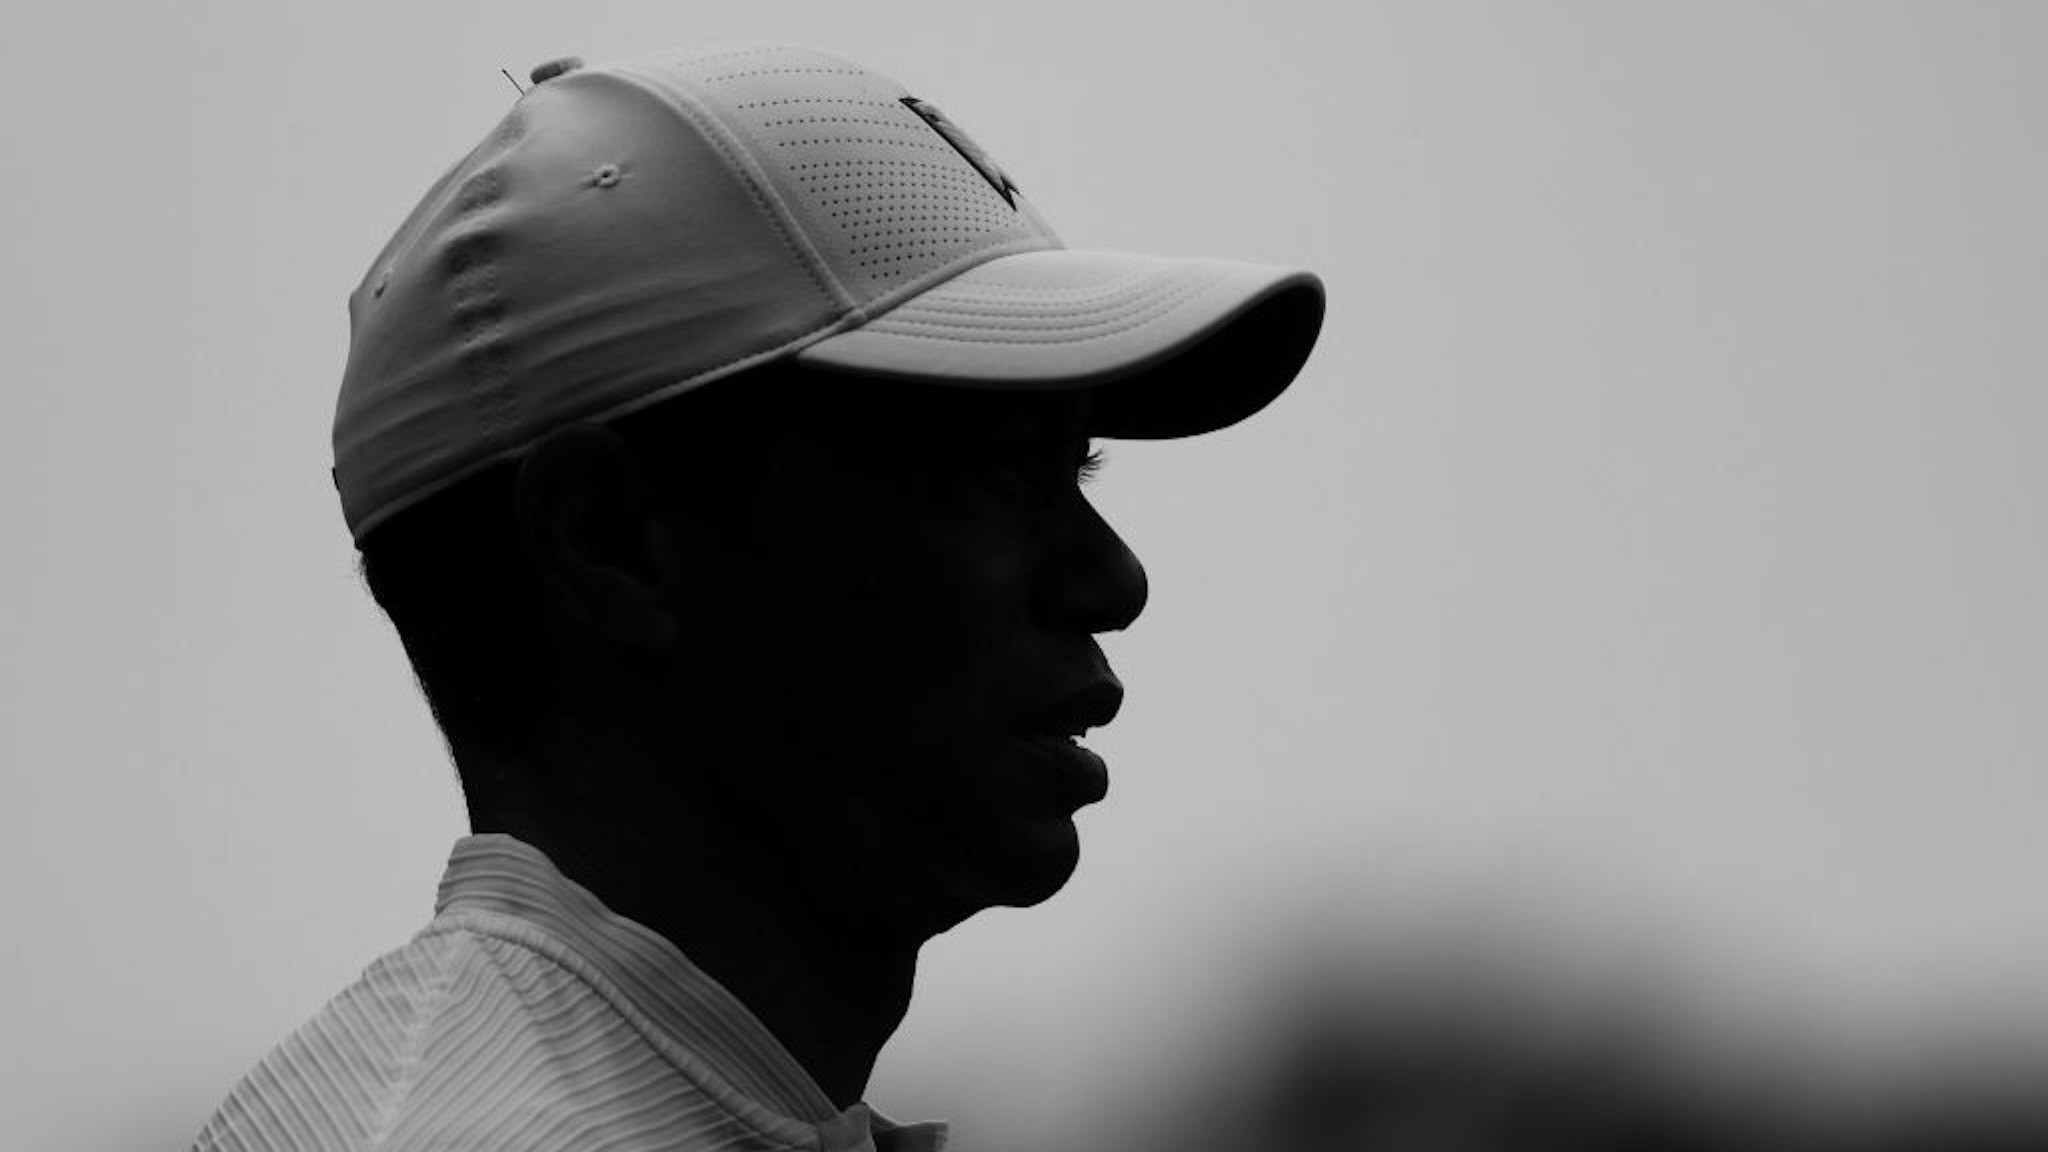 The Masters - Preview Day 3 AUGUSTA, GEORGIA - NOVEMBER 11: (EDITOR'S NOTE:This image has been converted to black and white.) Tiger Woods looks on during a practice round prior to the Masters at Augusta National Golf Club on November 11, 2020 in Augusta, Georgia. (Photo by Patrick Smith/Getty Images) Patrick Smith / Staff via Getty Images